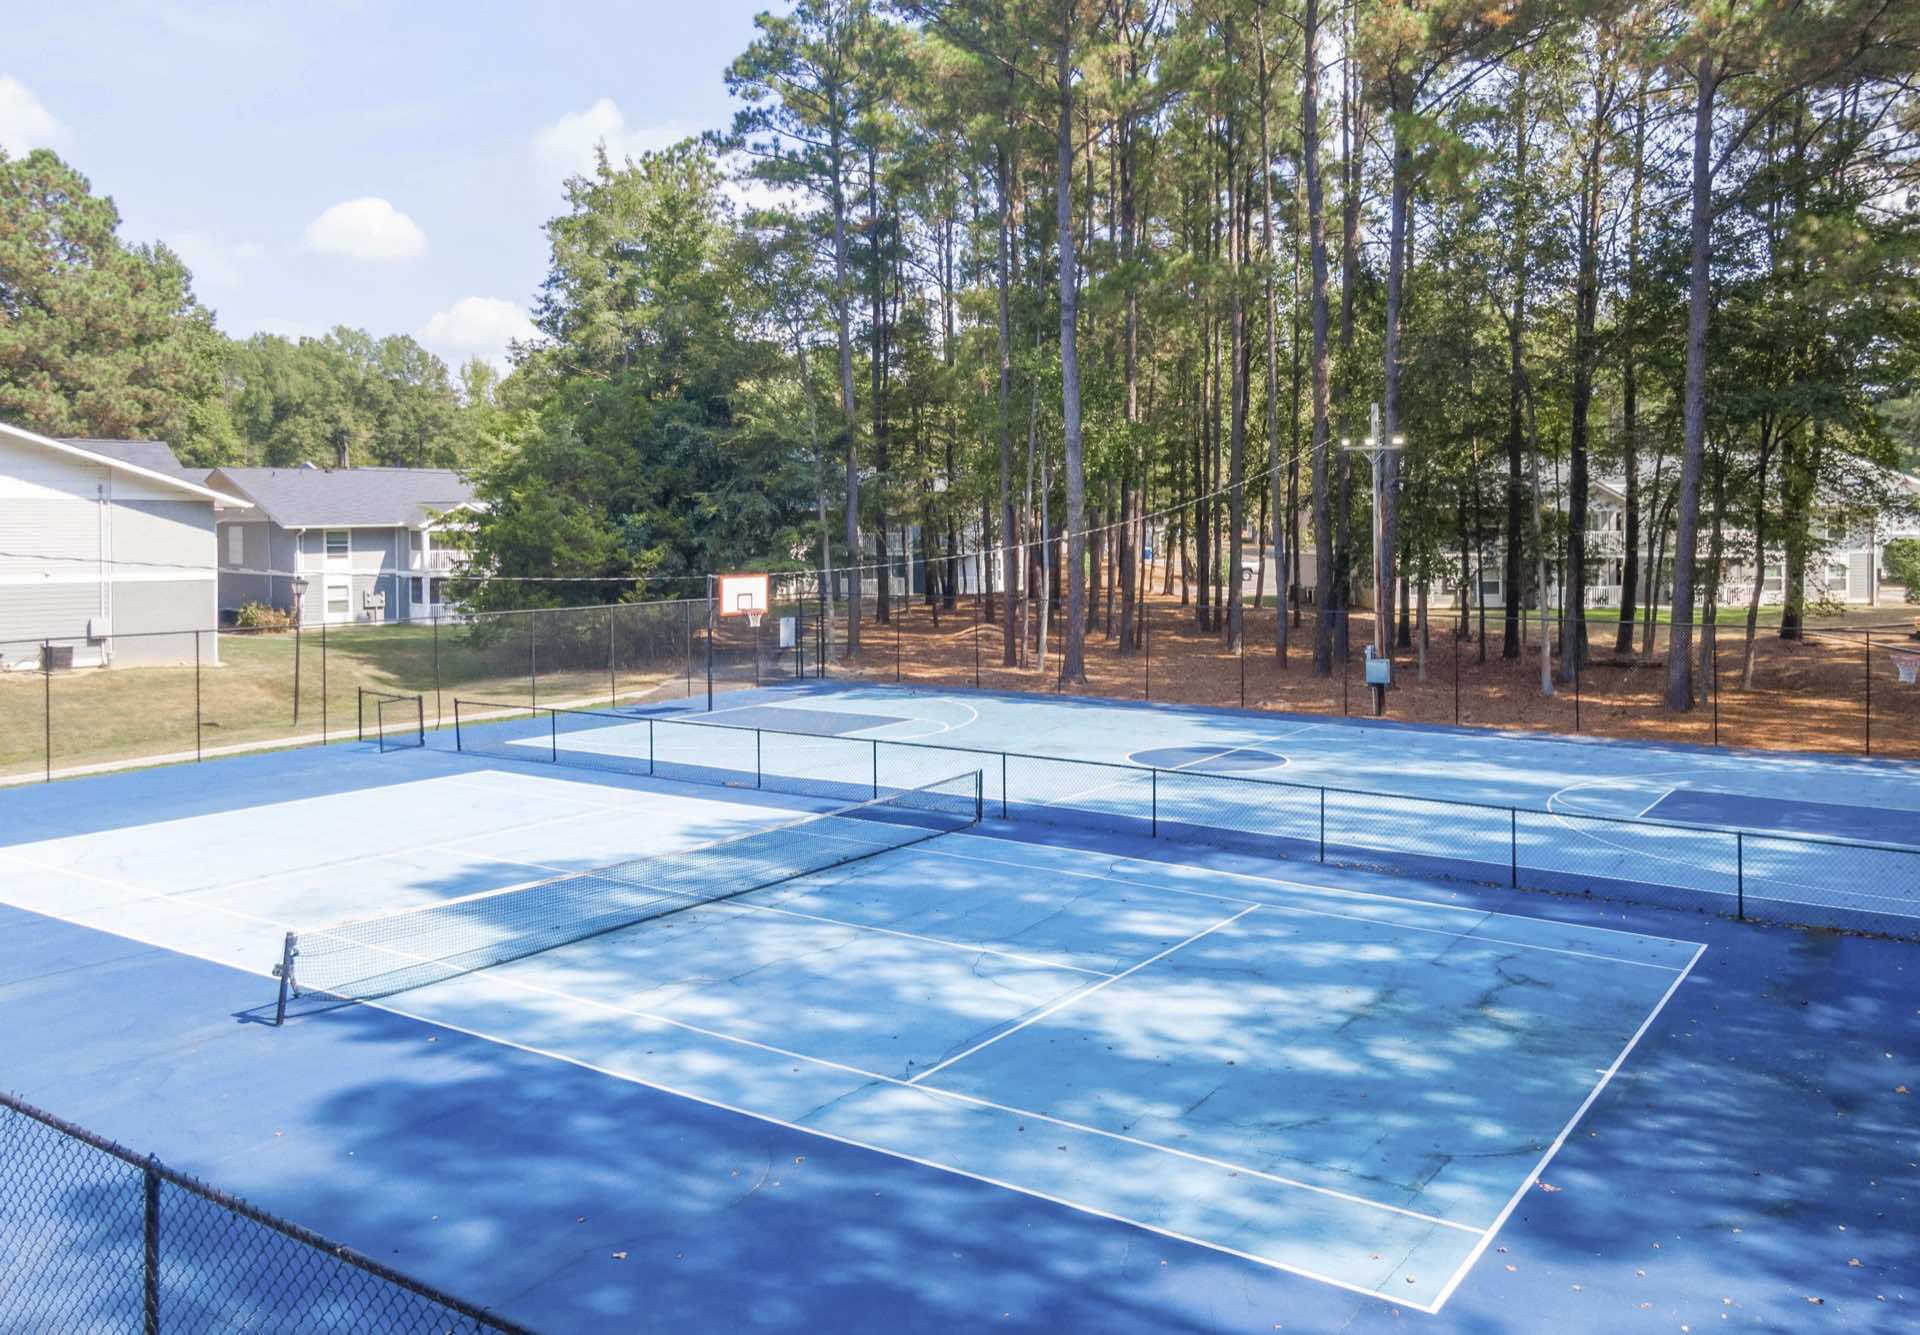 tennis and pickle ball courts